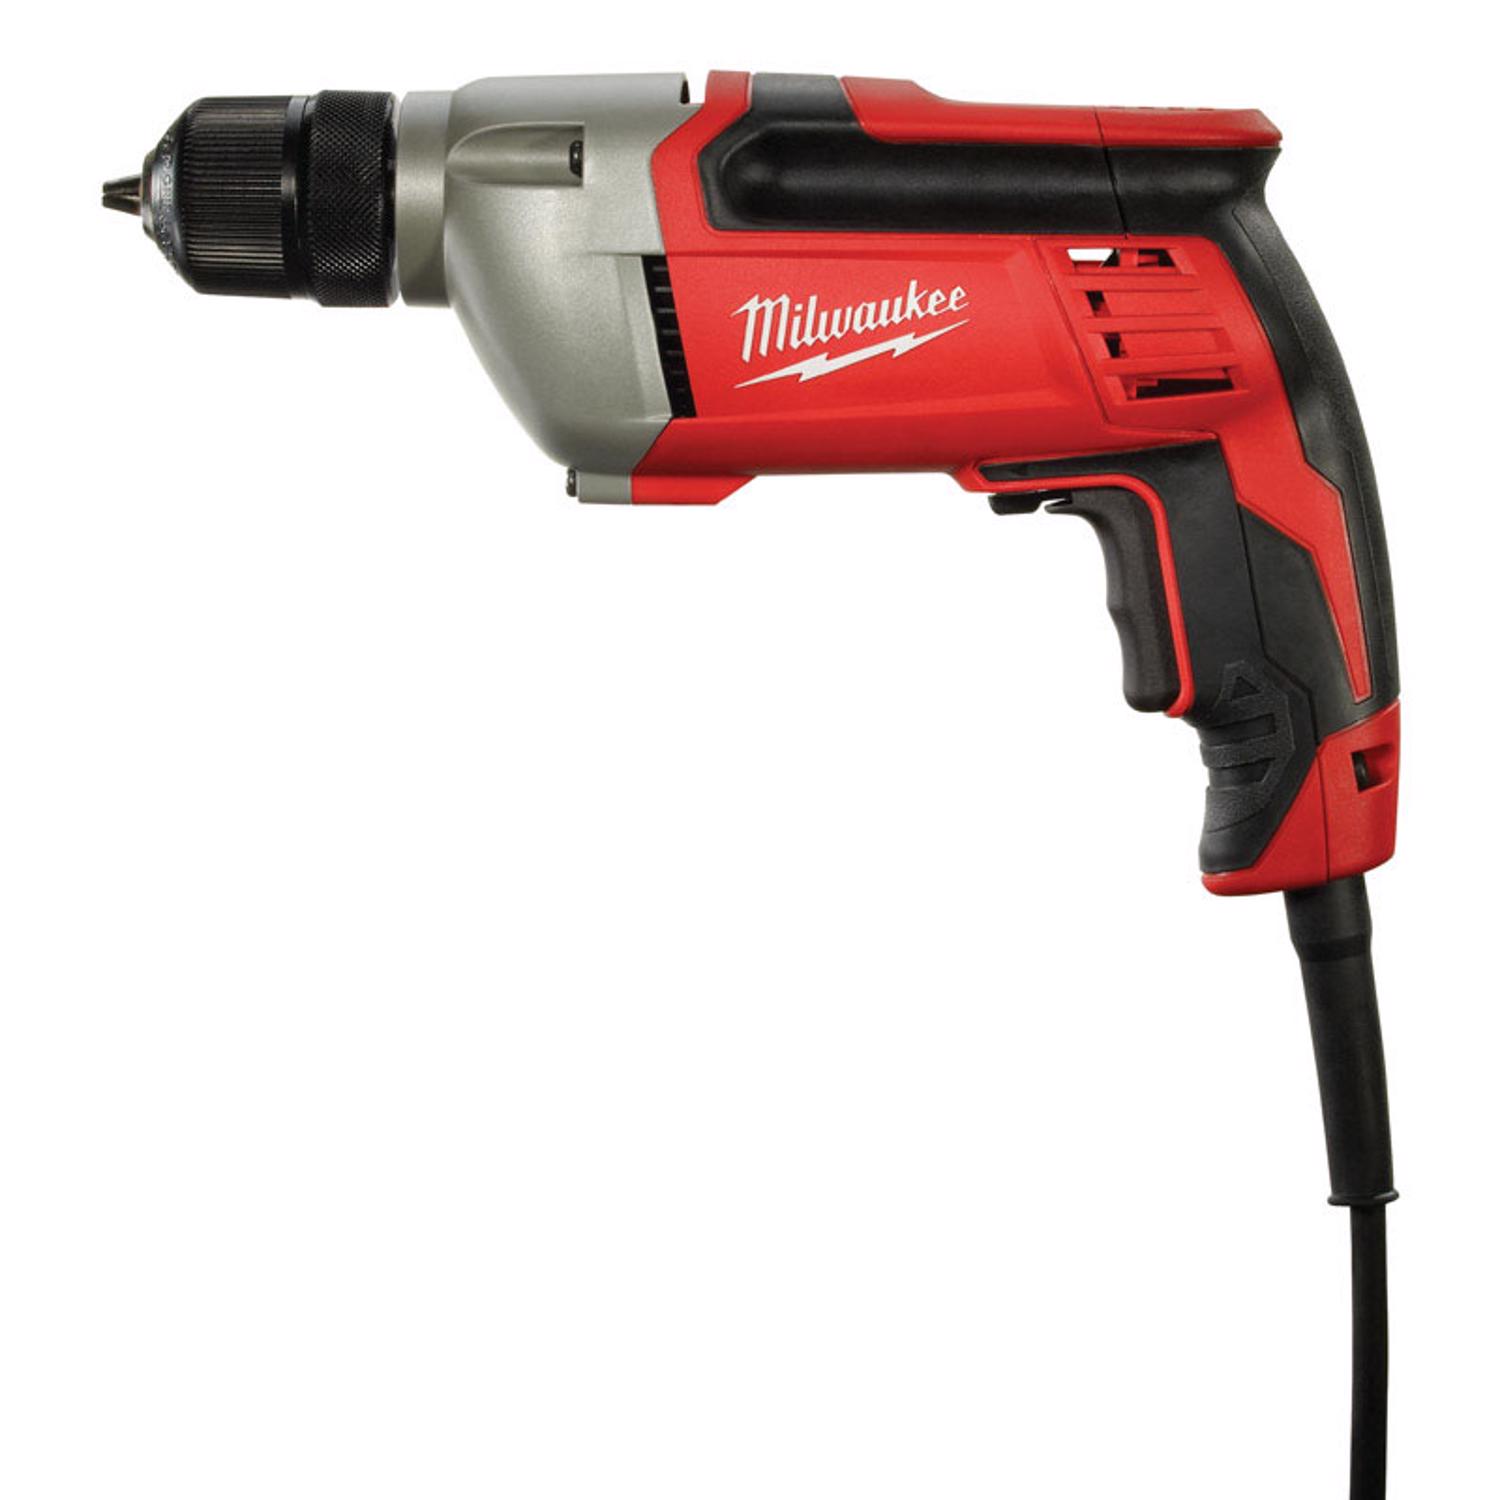 Photos - Drill / Screwdriver Milwaukee 8 amps 3/8 in. Corded Drill 0240-20 